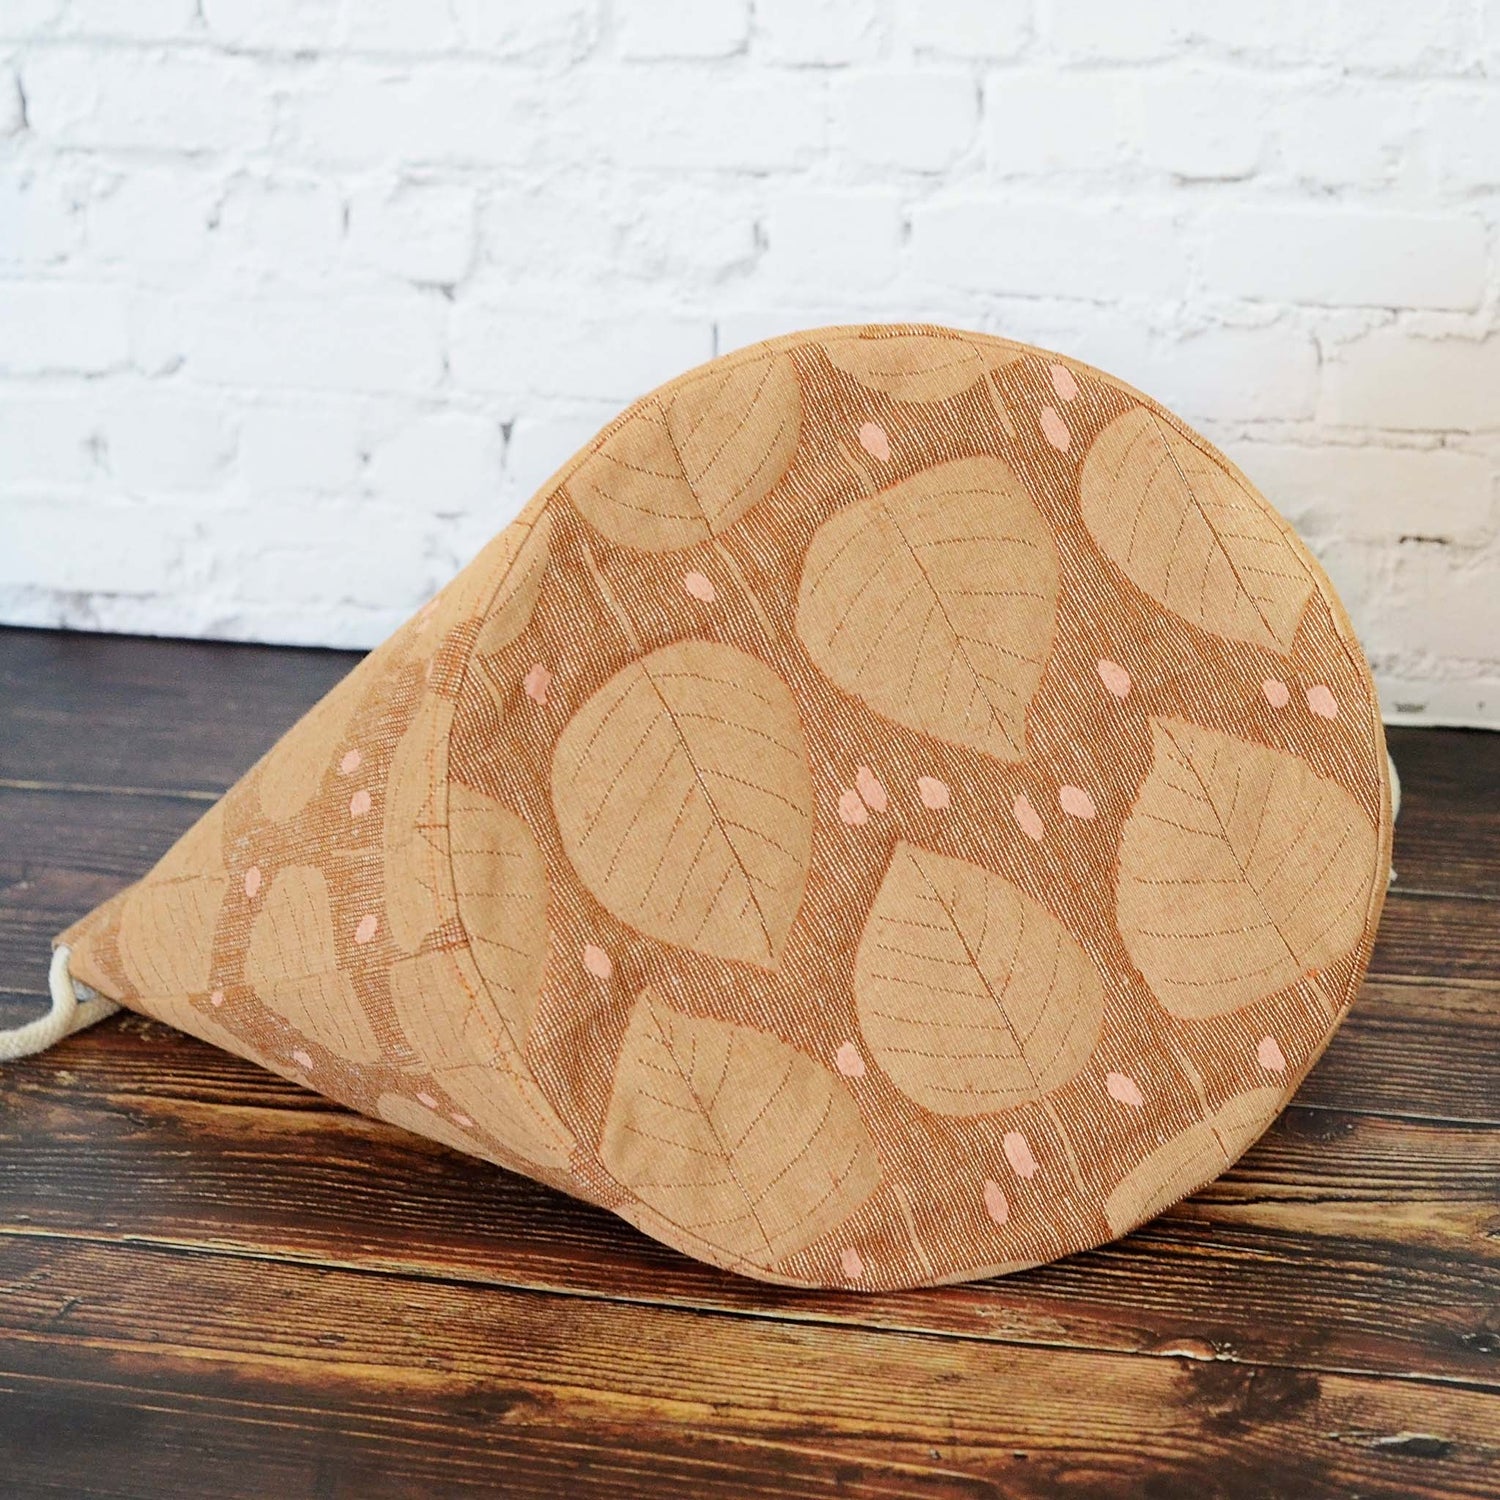  Brown linen knitting bag with leaves pattern. Made in Canada by Yellow Petal Handmade.